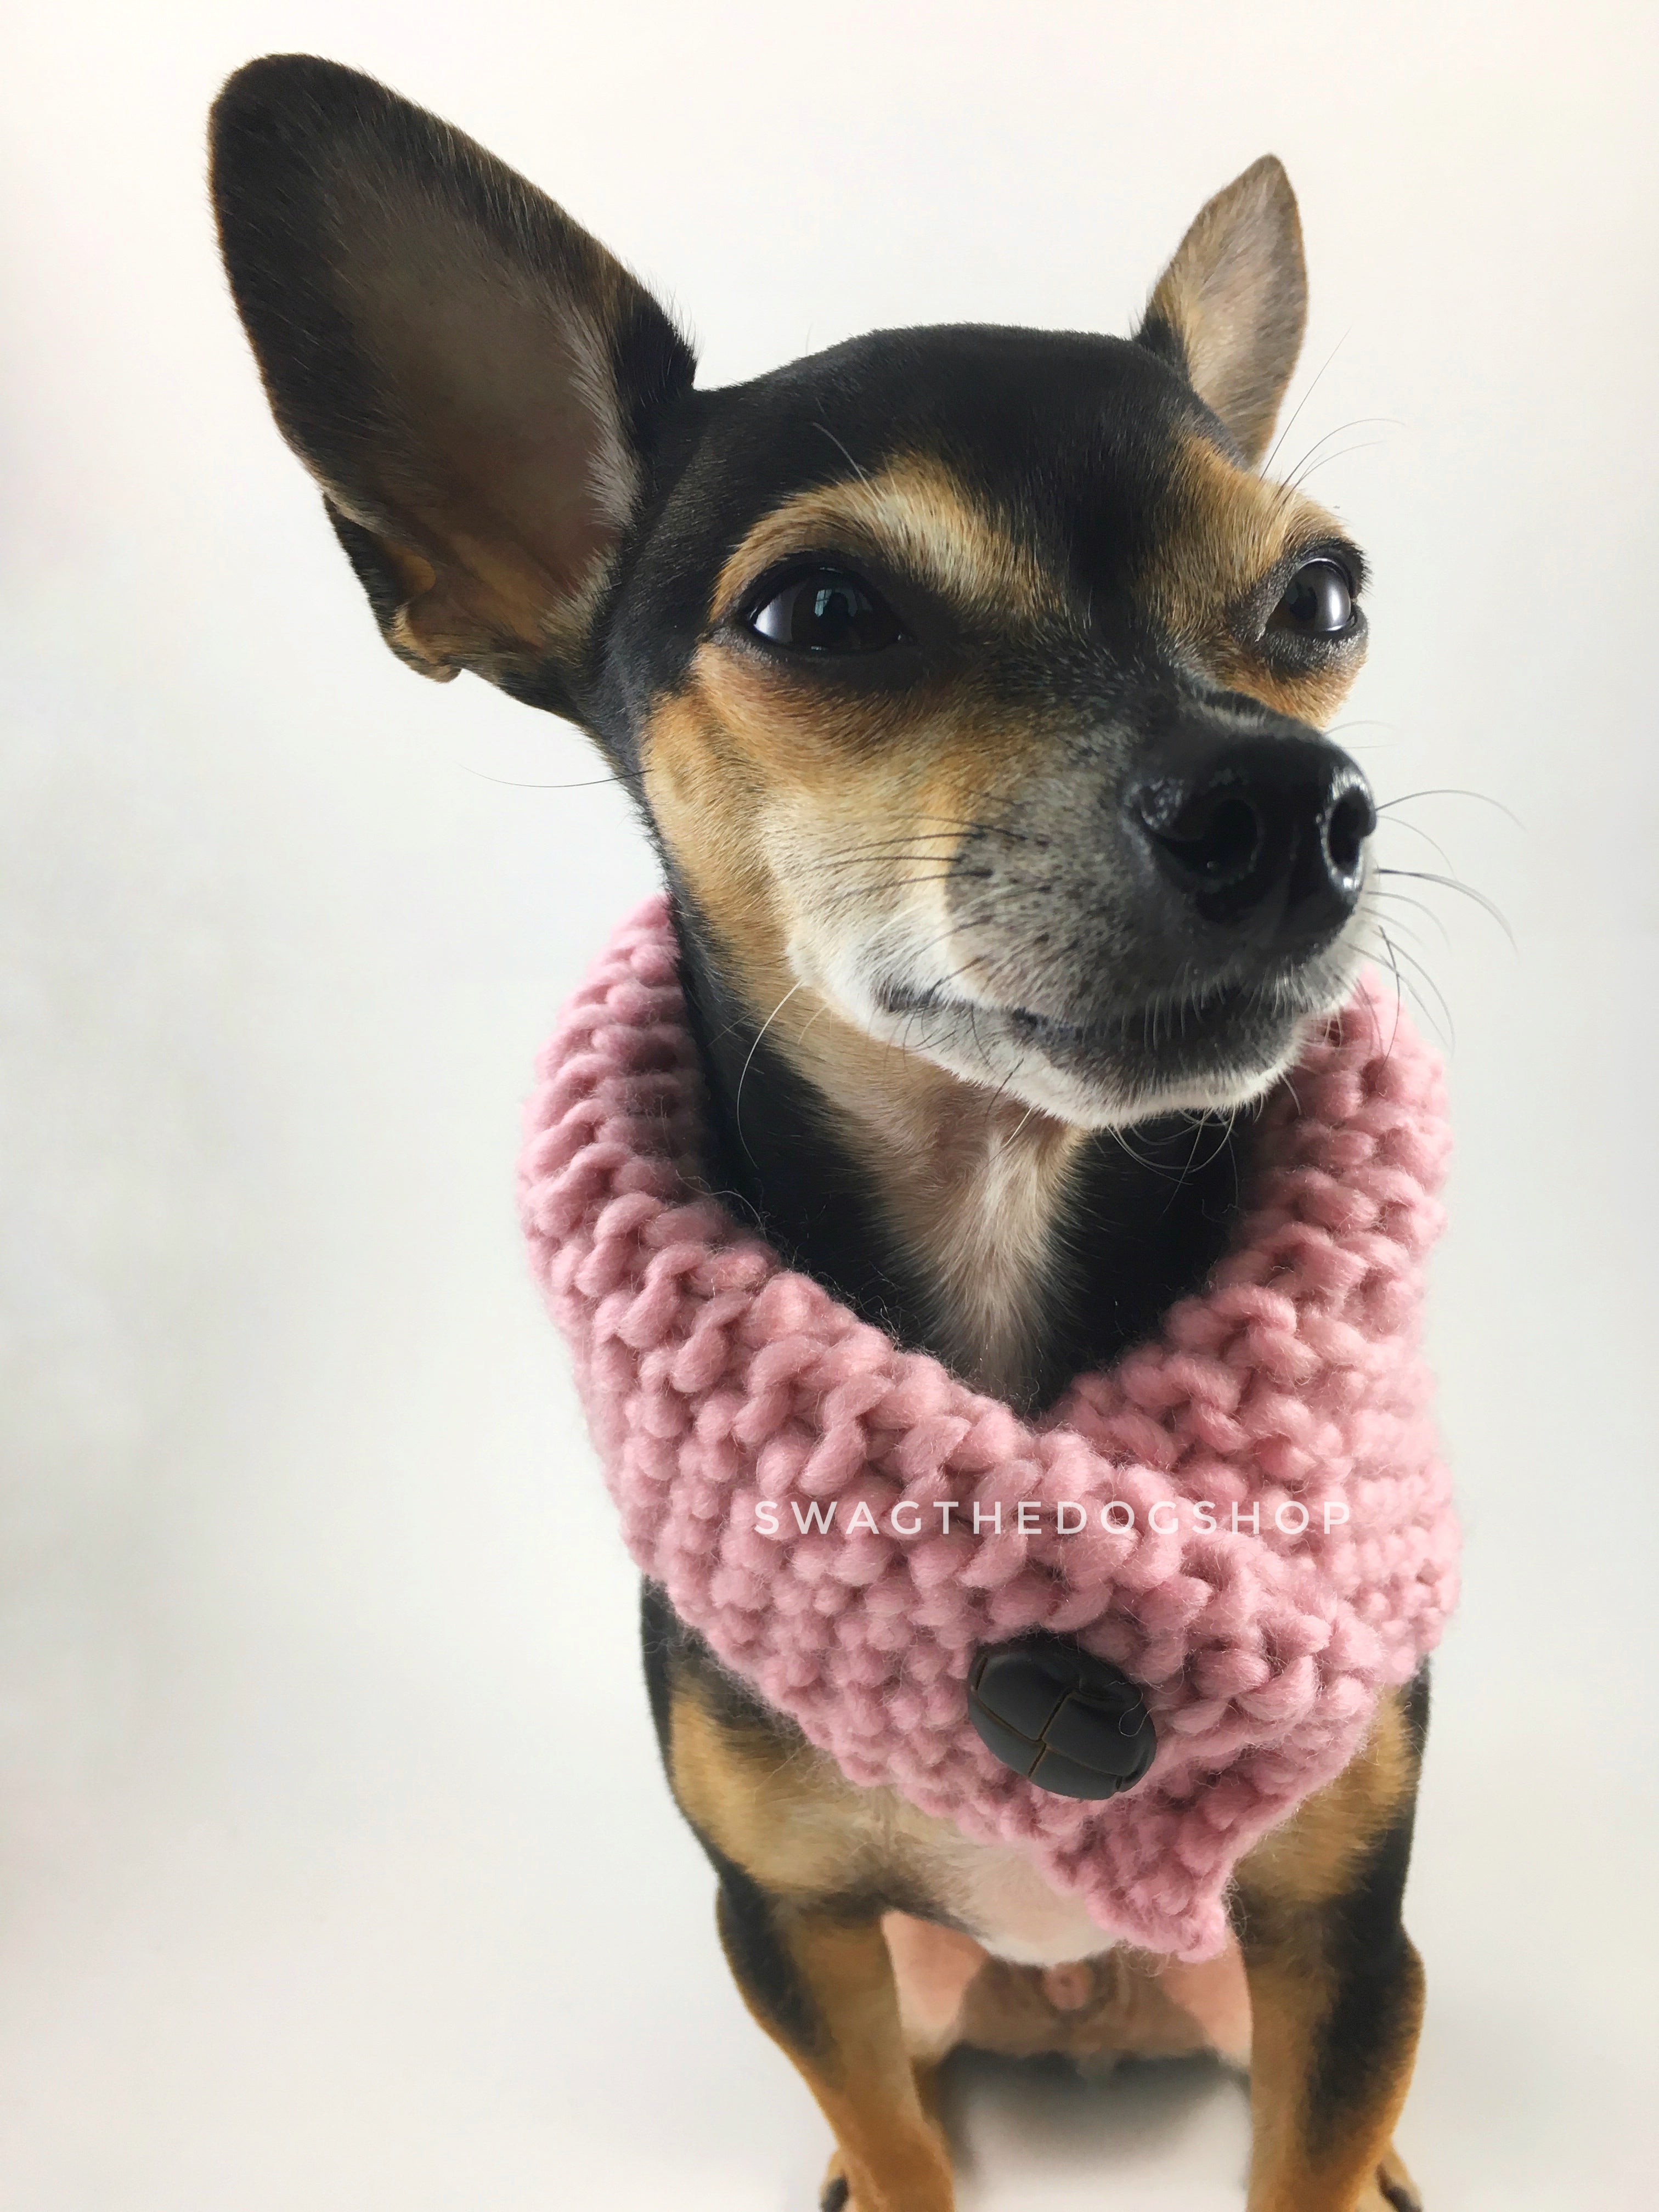 Rosewater Swagsnood - Close Up View of Cute Chihuahua Dog Wearing Dusty Rose Pink Color Dog Snood with Accent Button